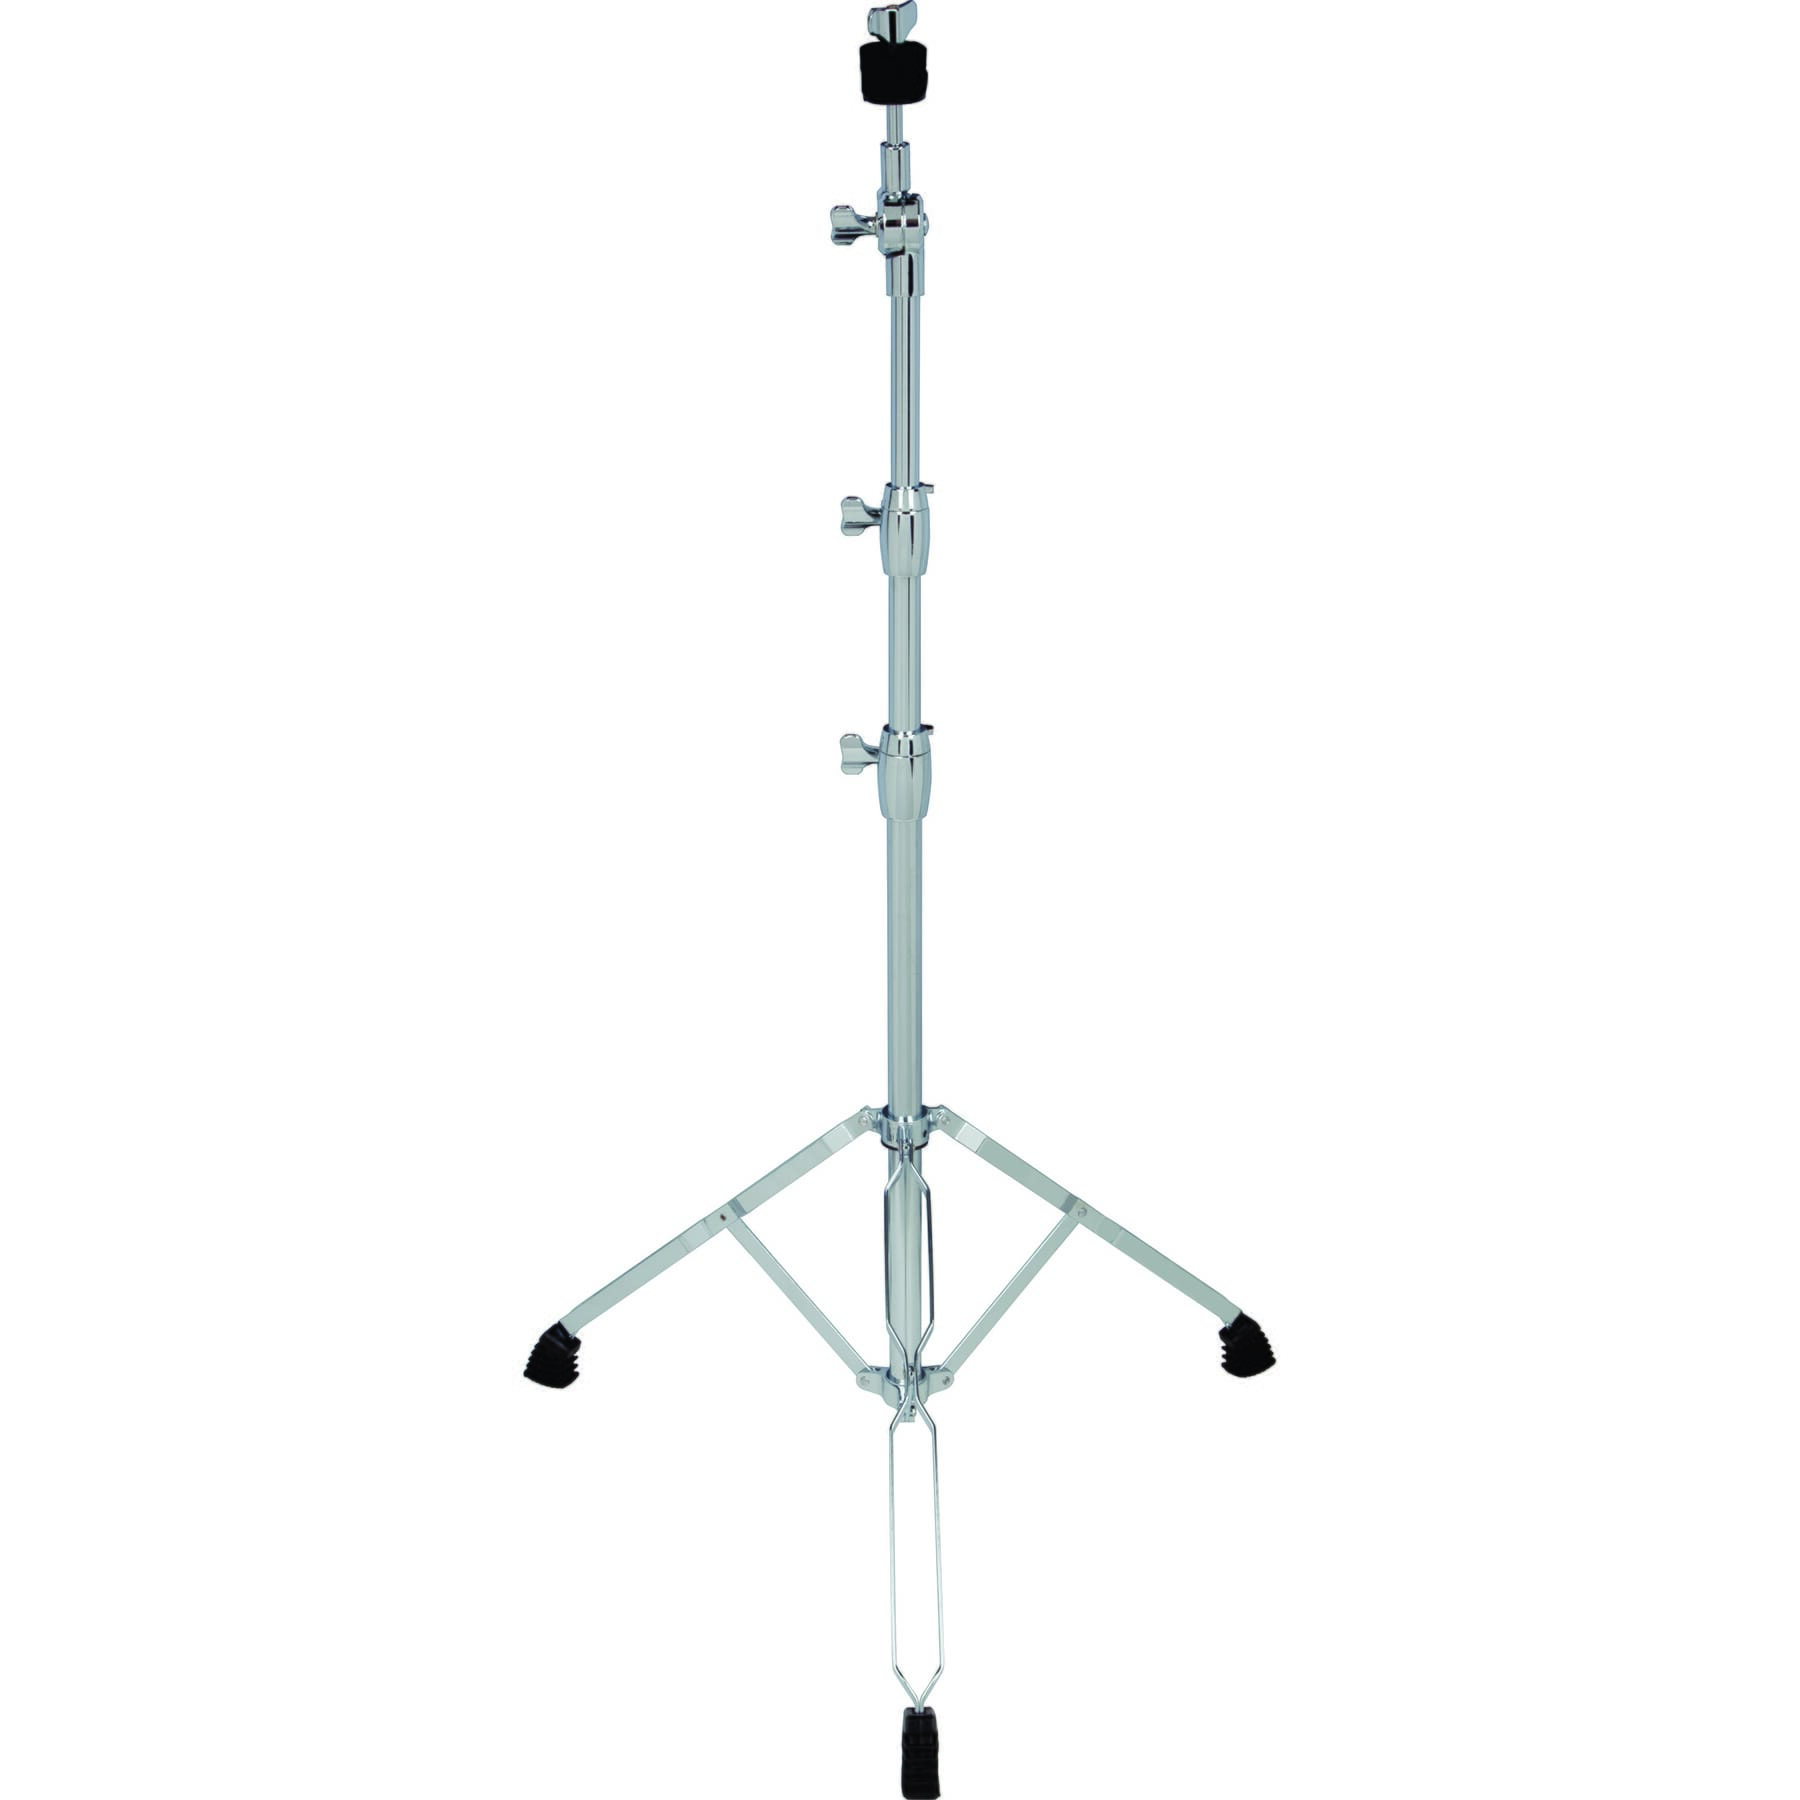 RX series 3 tier Straight stand